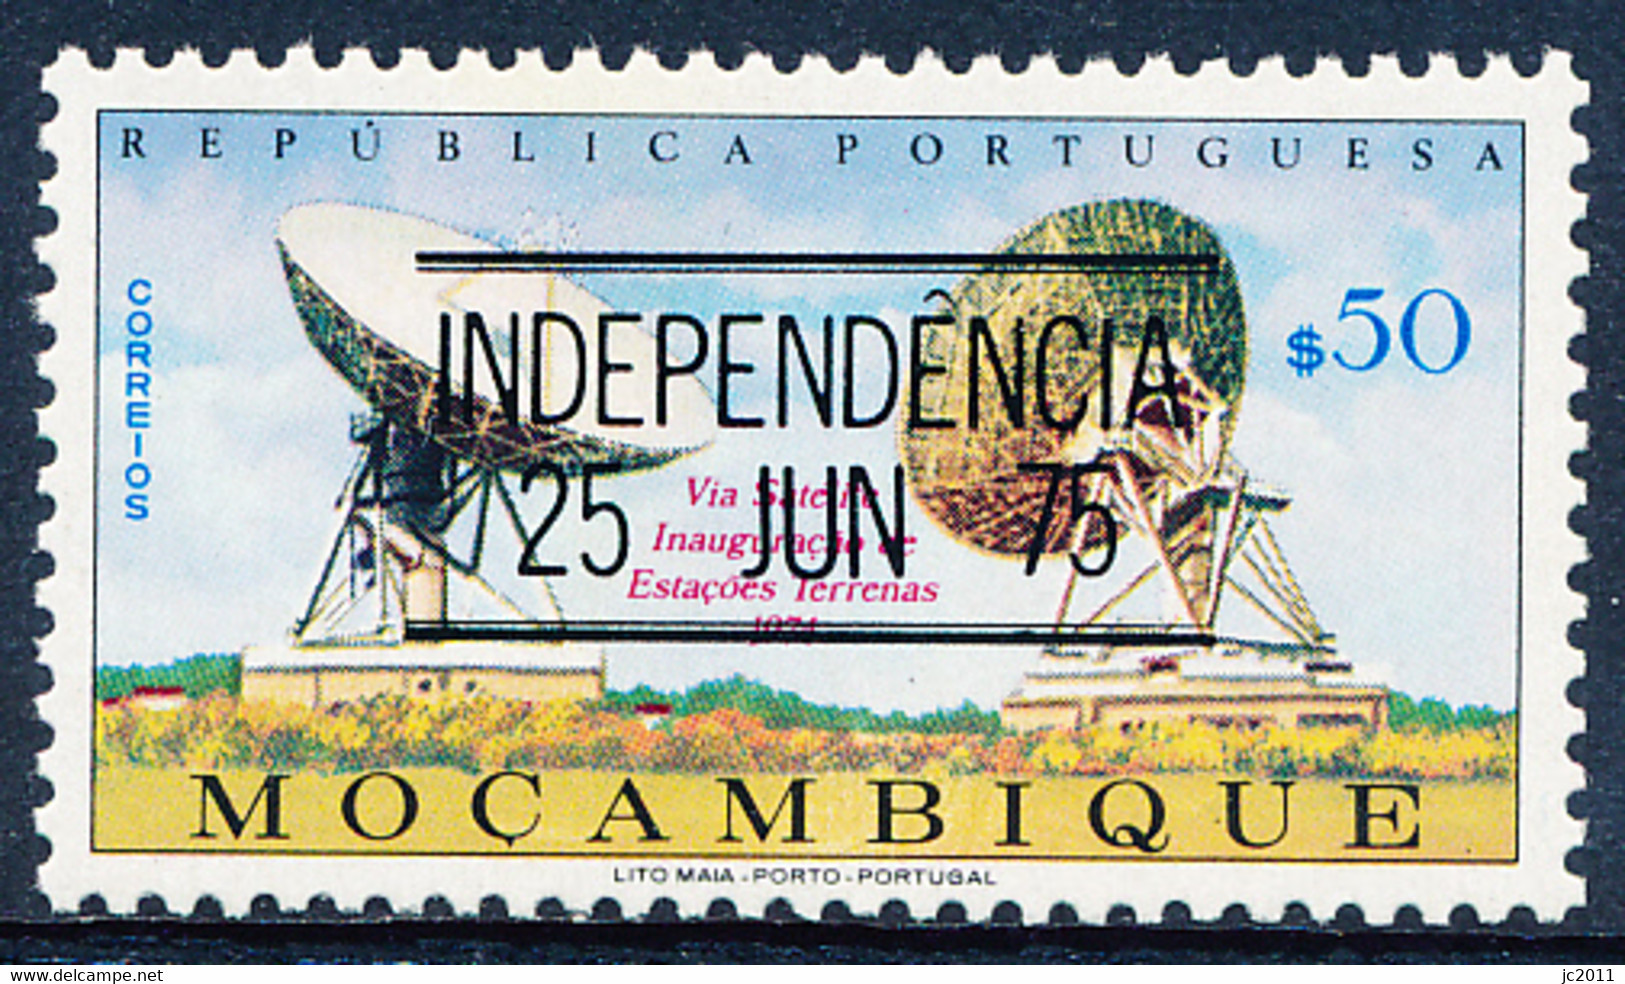 Mozambique - 1975 - Independence / Earth Stations - Via Satellite - 1974 Type - MNH - Mozambique